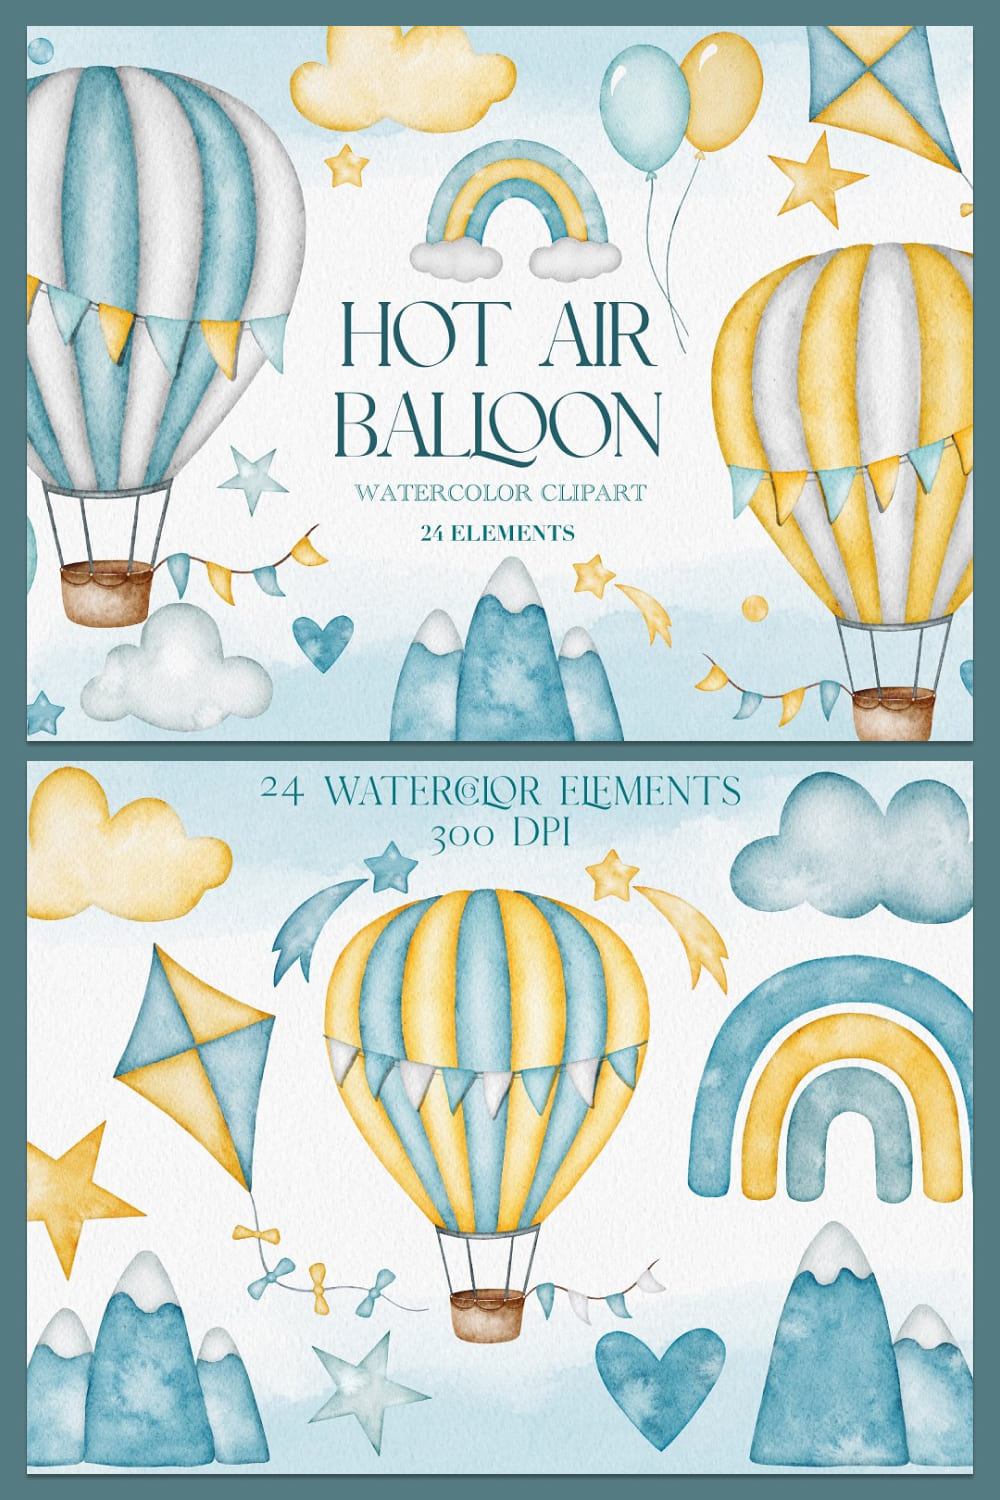 A selection of exquisite images of watercolor hot air balloons.